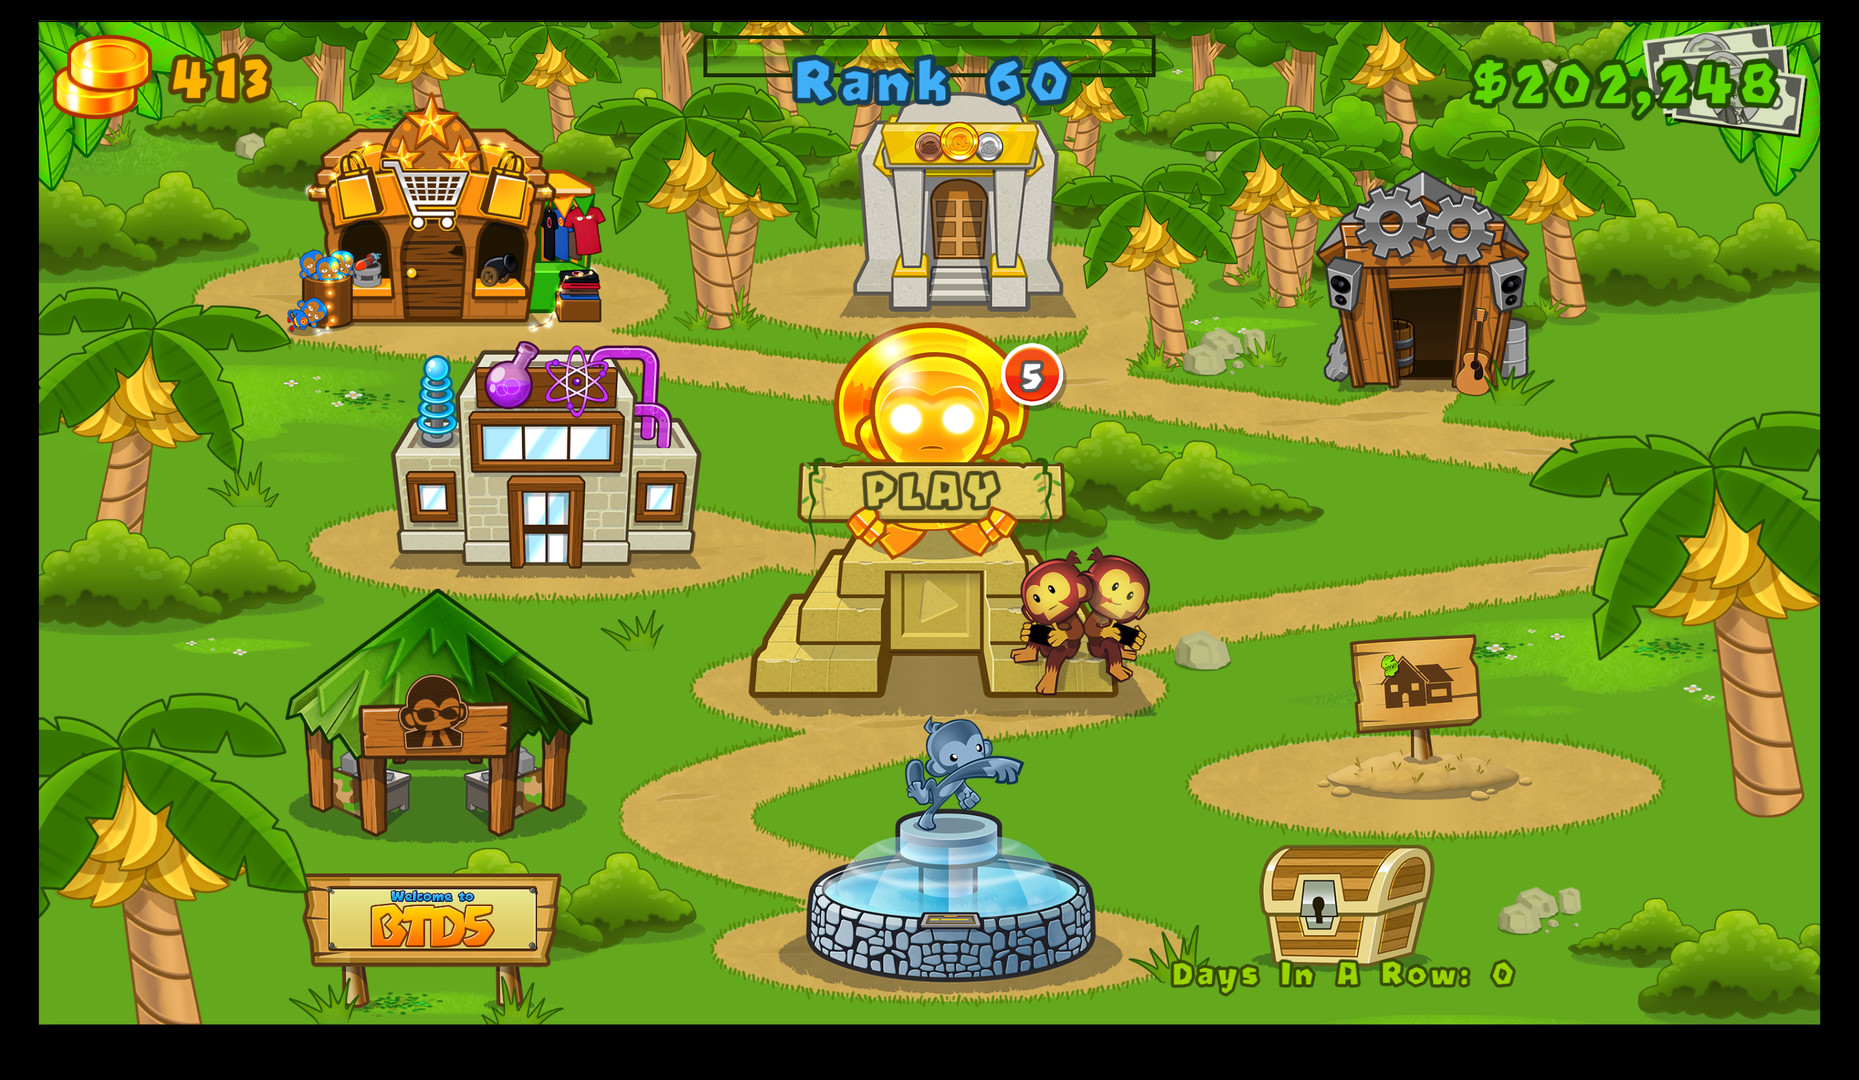 Where Can I Play Bloons Td 5 Deluxe 1 0 5 Game For Free Certifiedwatchmovi Over Blog Com